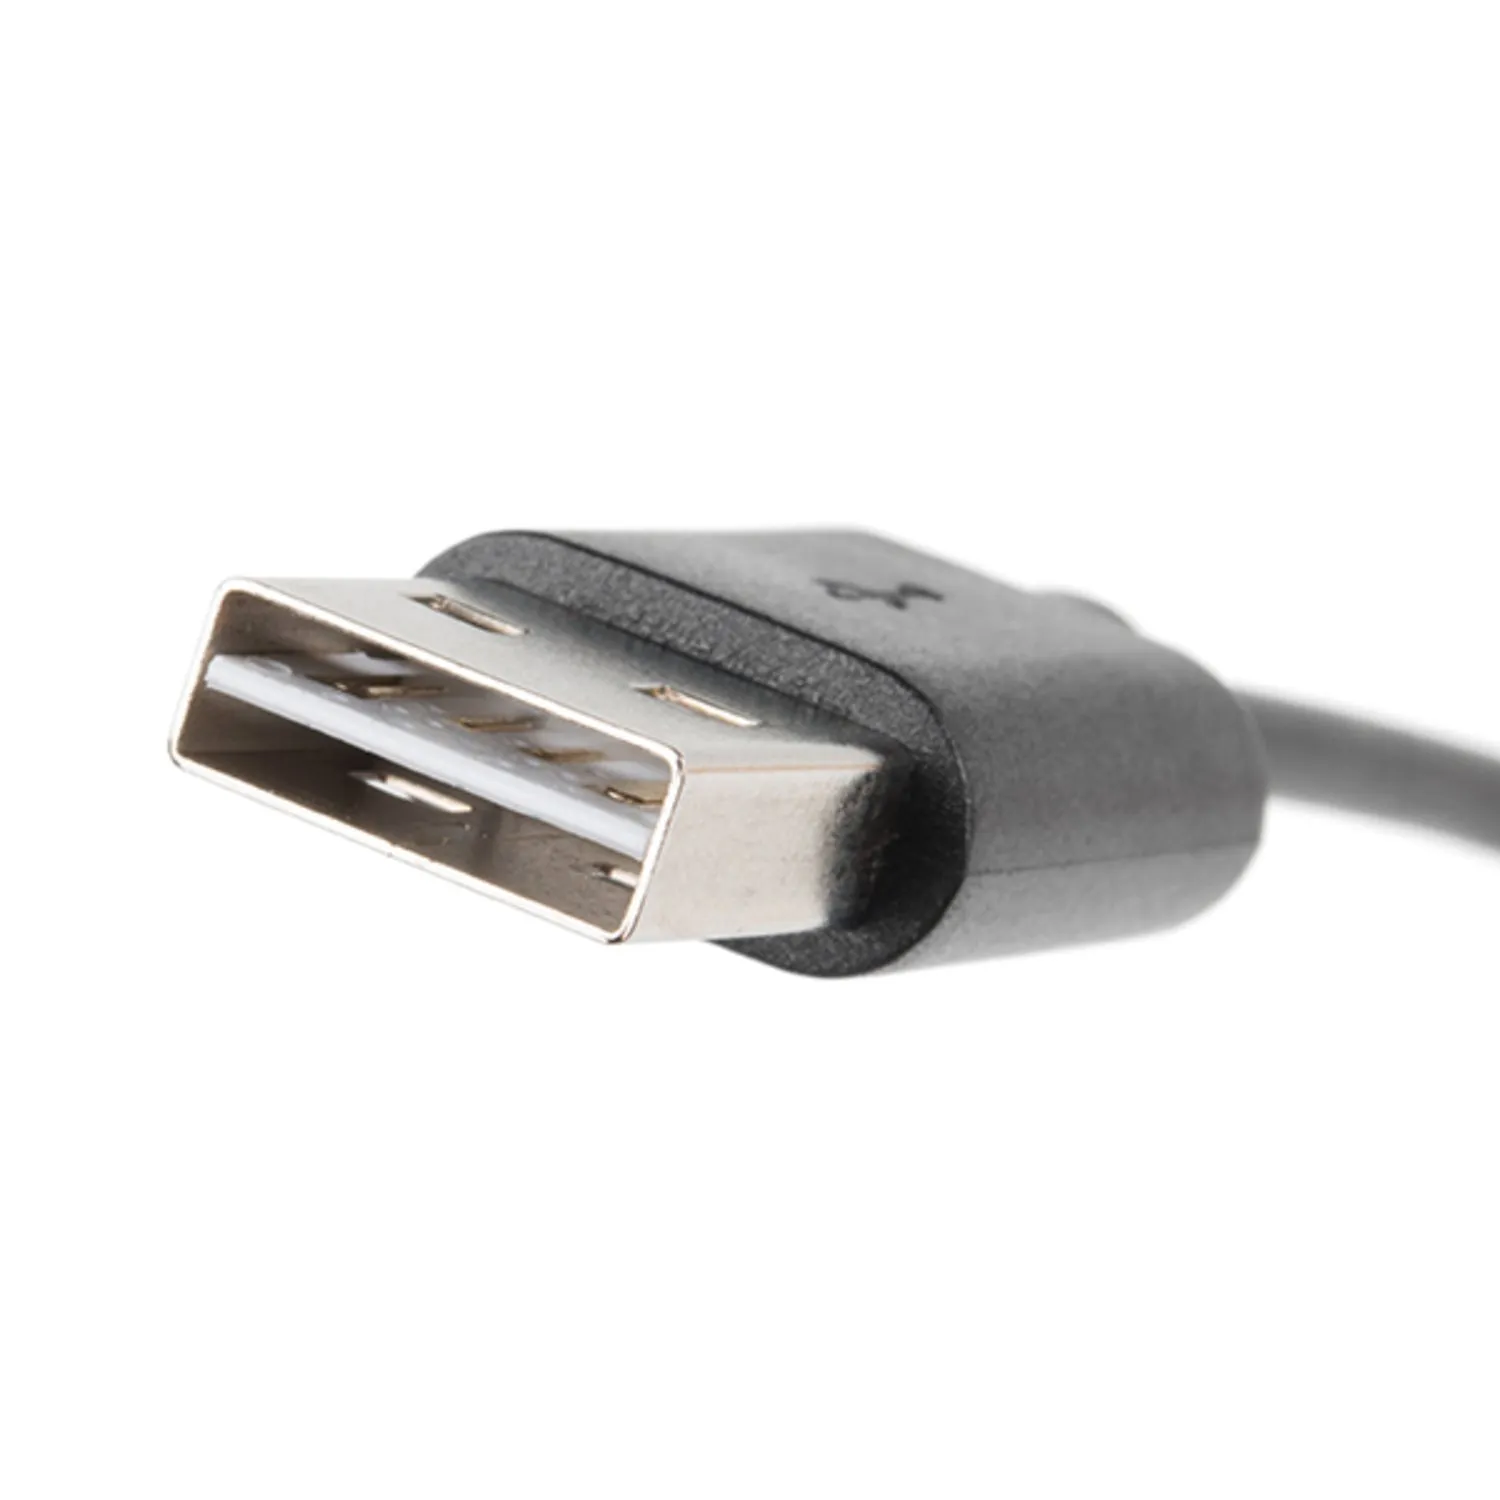 Photo of Reversible USB A to C Cable - 0.8m